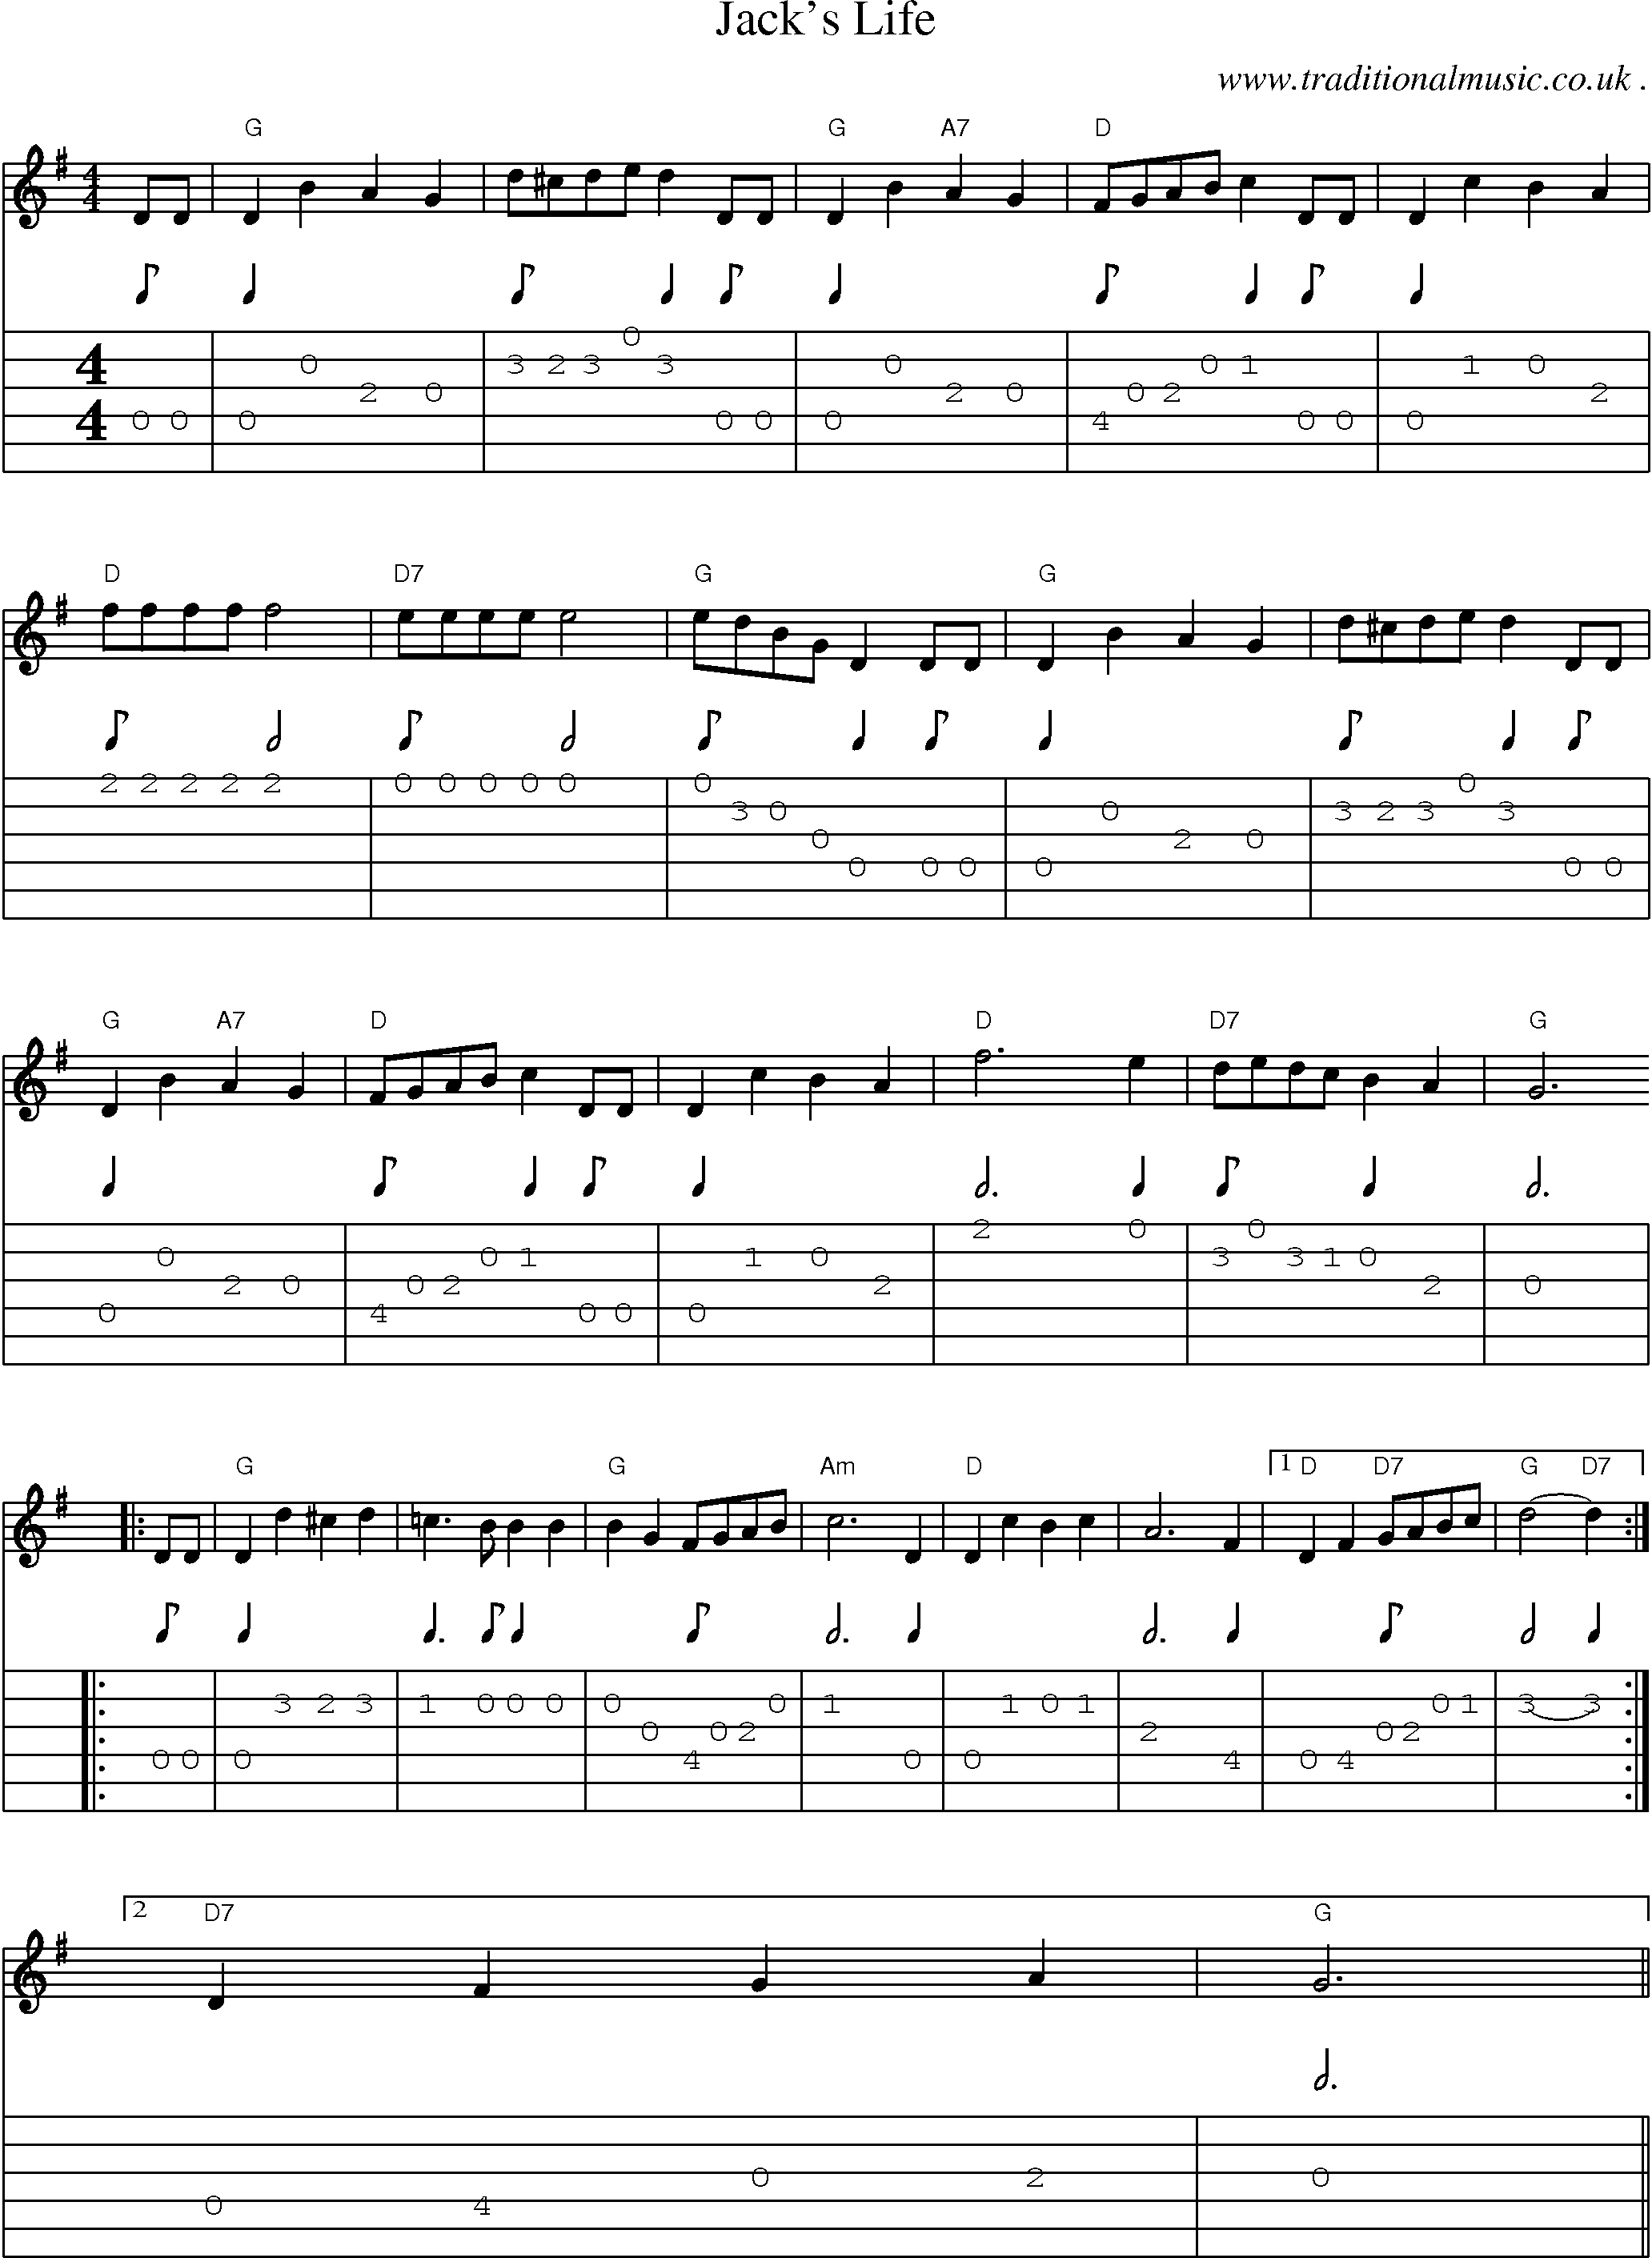 Sheet-Music and Guitar Tabs for Jacks Life